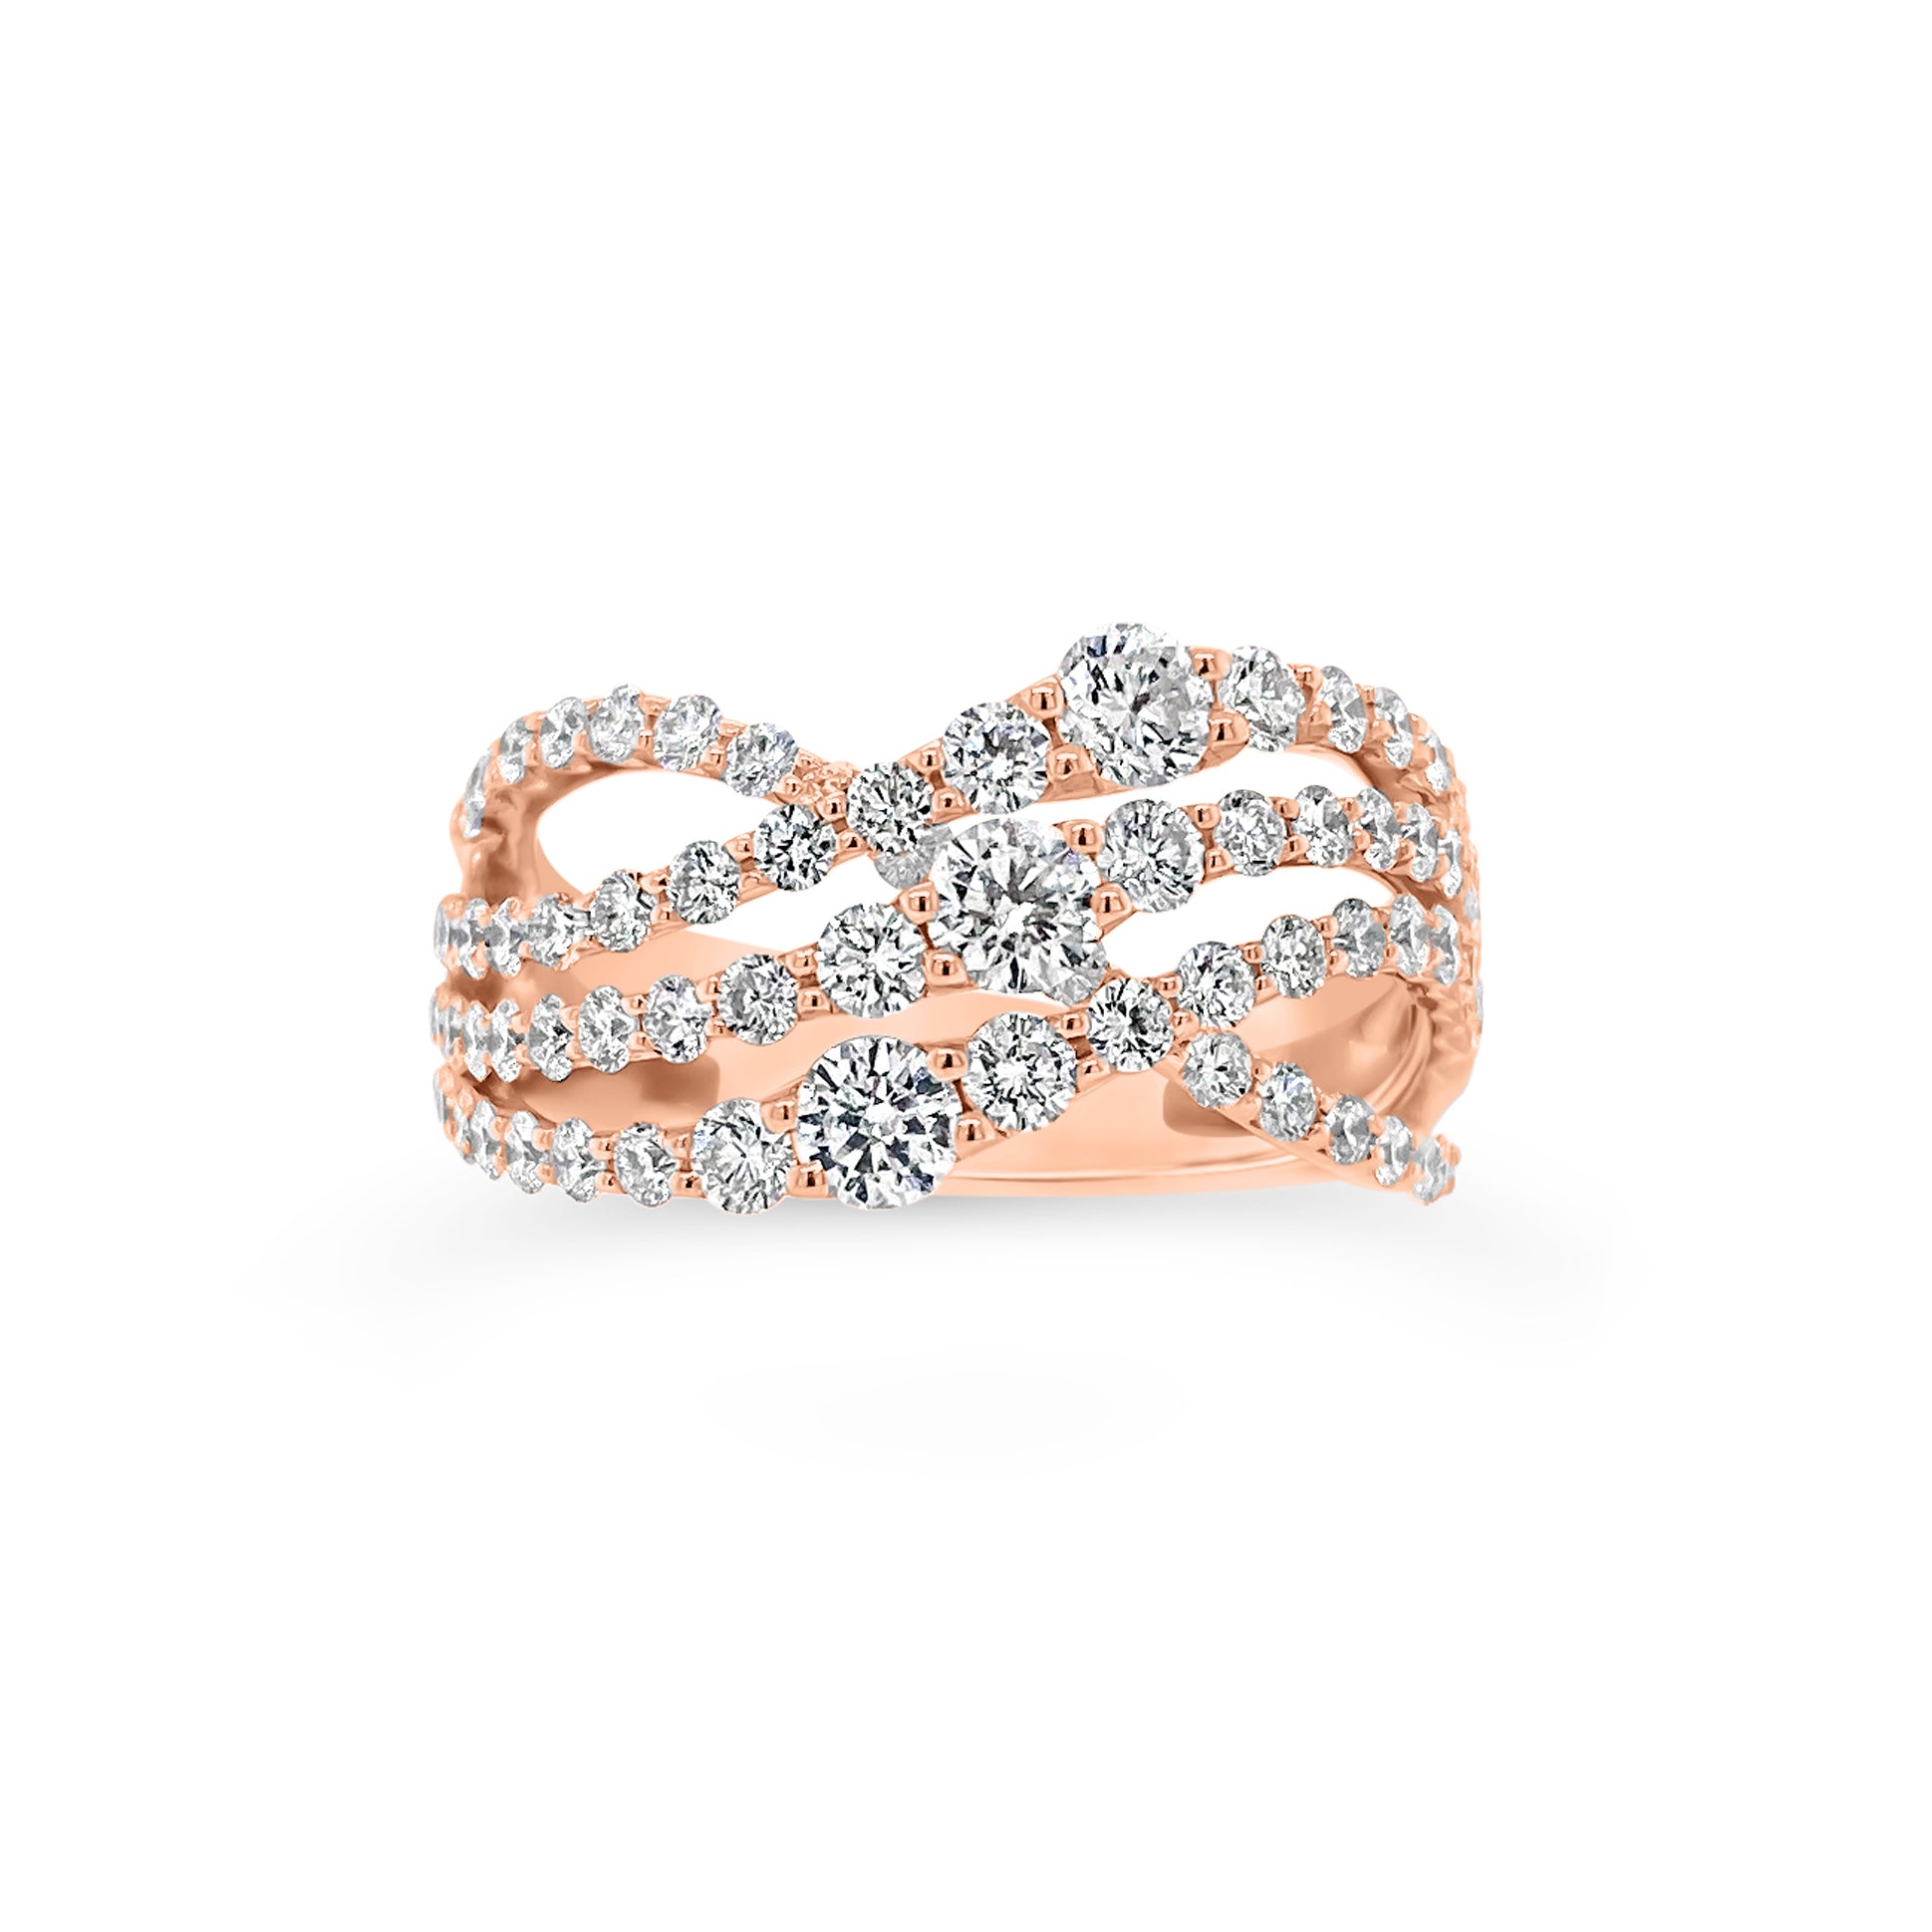 Graduated Diamonds Crossover Ring  - 18K gold weighing 5.71 grams  - 80 round diamonds totaling 1.54 carats